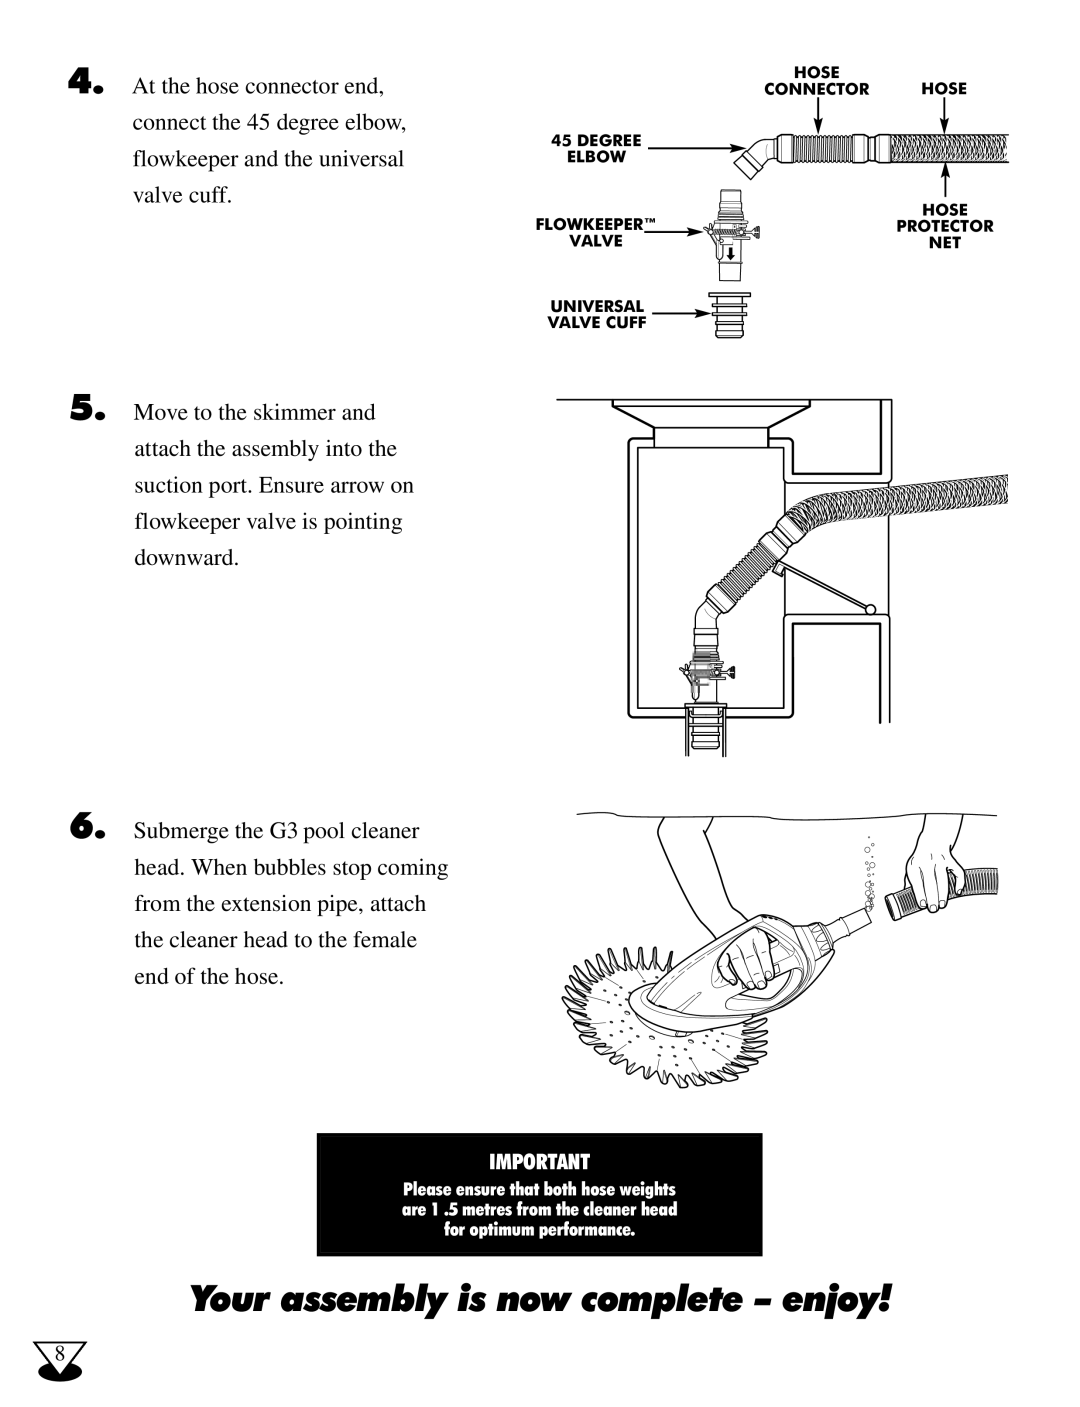 Baracoda G3 owner manual Your assembly is now complete - enjoy, HOSE CONNECTOR HOSE 45 DEGREE ELBOW, Hose, Protector, Valve 